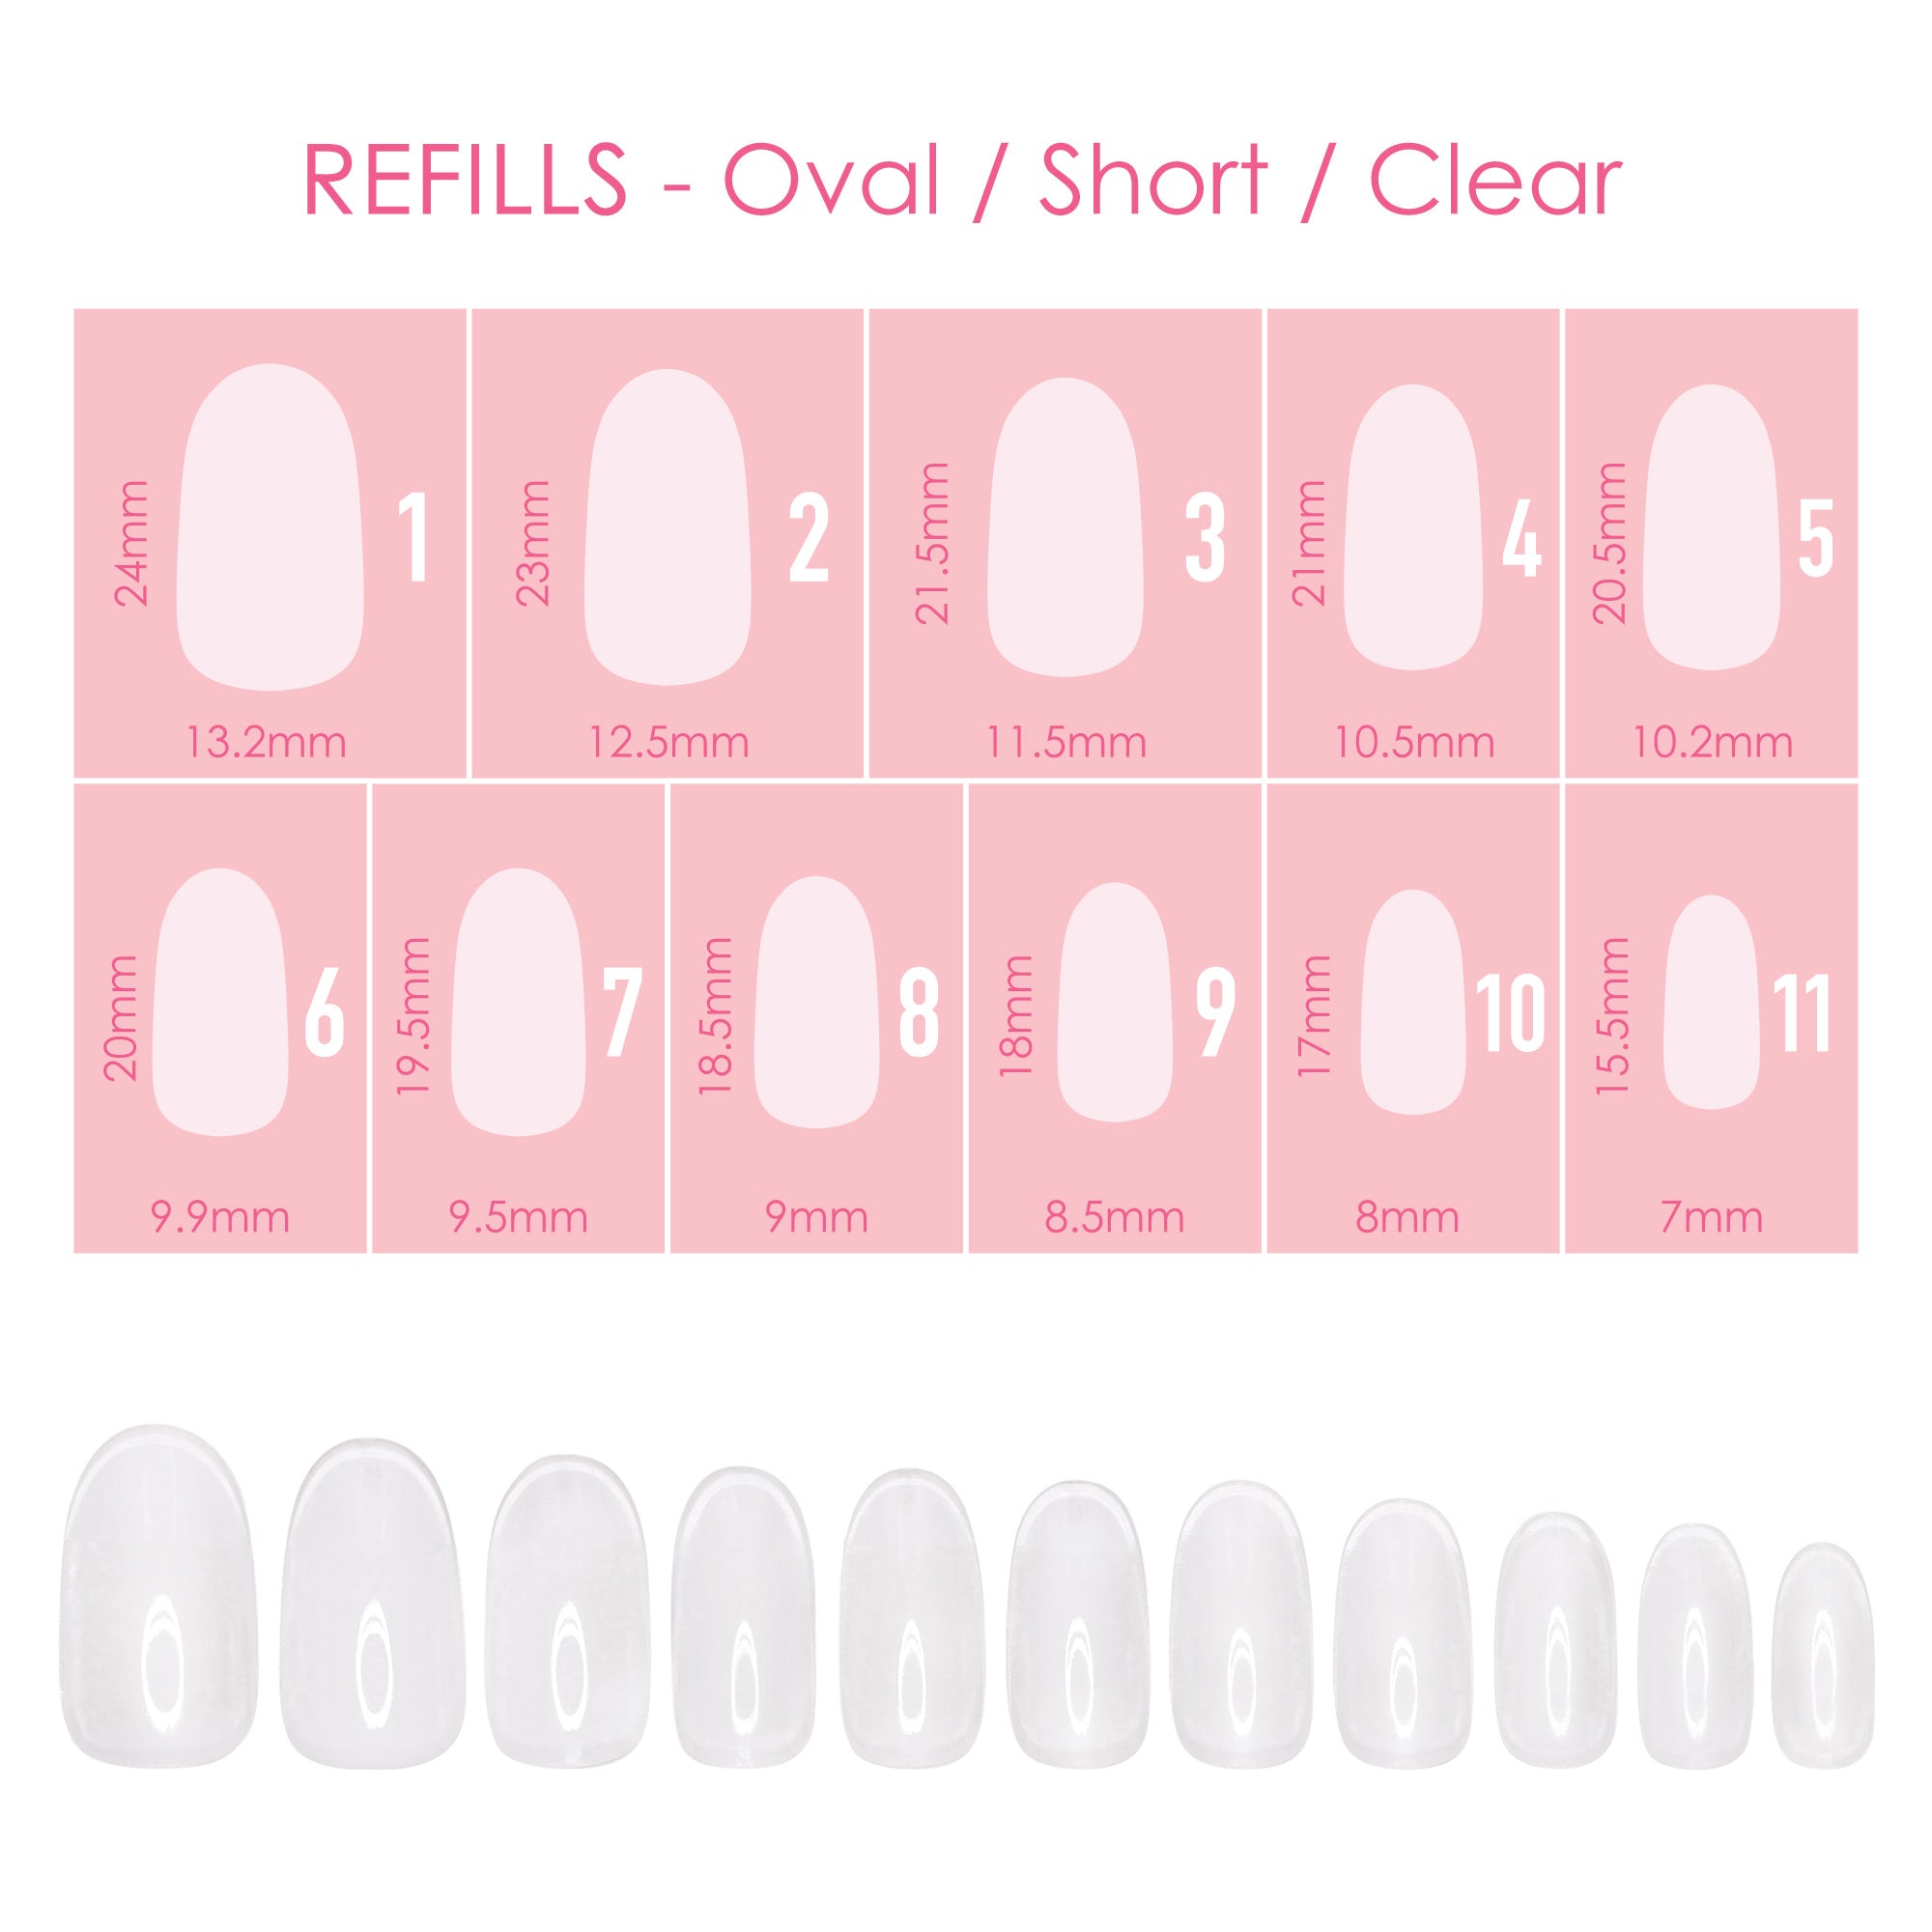 Charme Gel Extension Tips Refill / Oval / Short / Clear